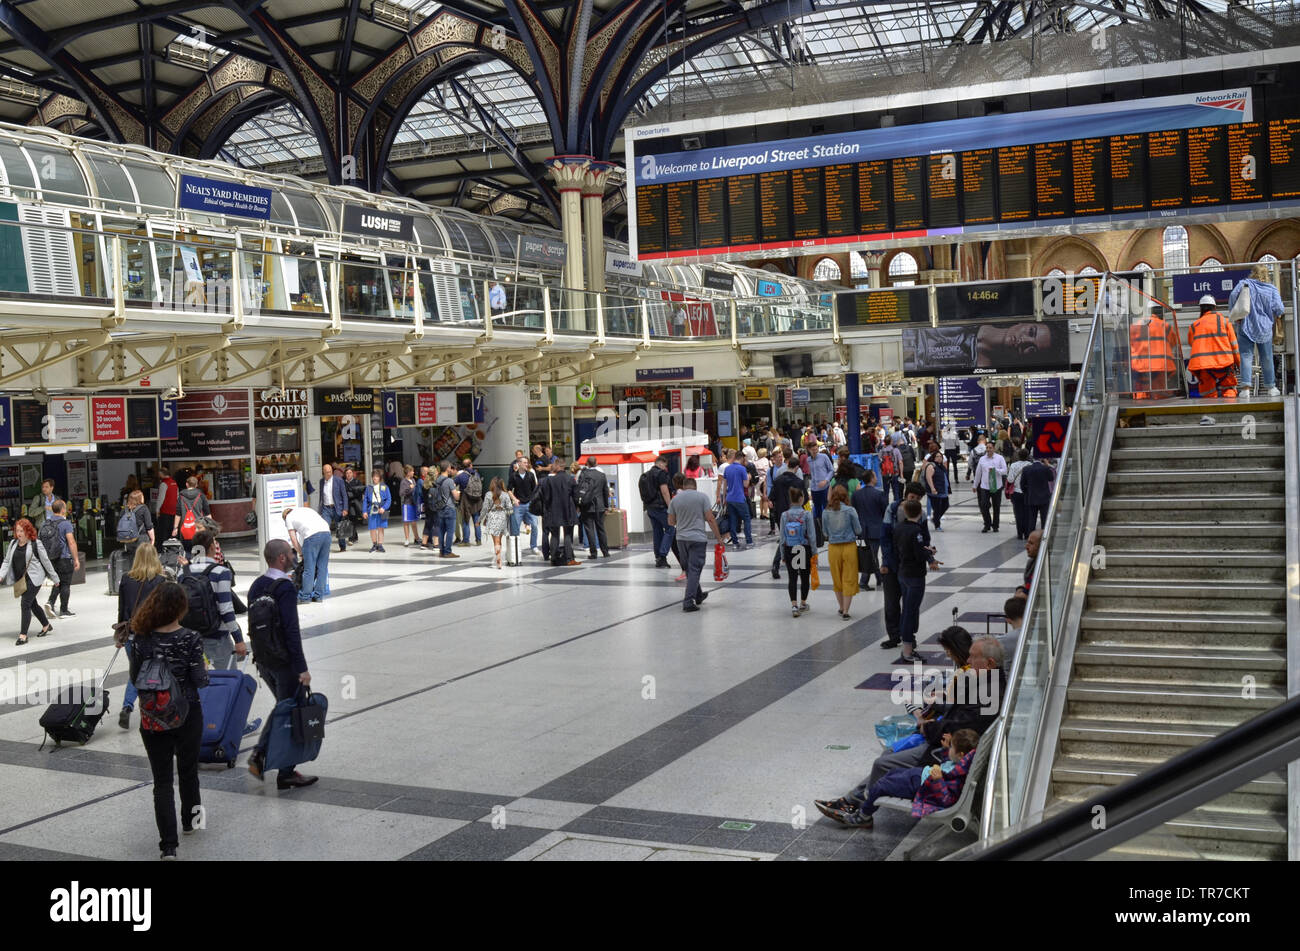 Liverpool street station, London United Kingdom, 14 June 2018. The main hall of the station, buzzing with people, the informative luminous display boa Stock Photo